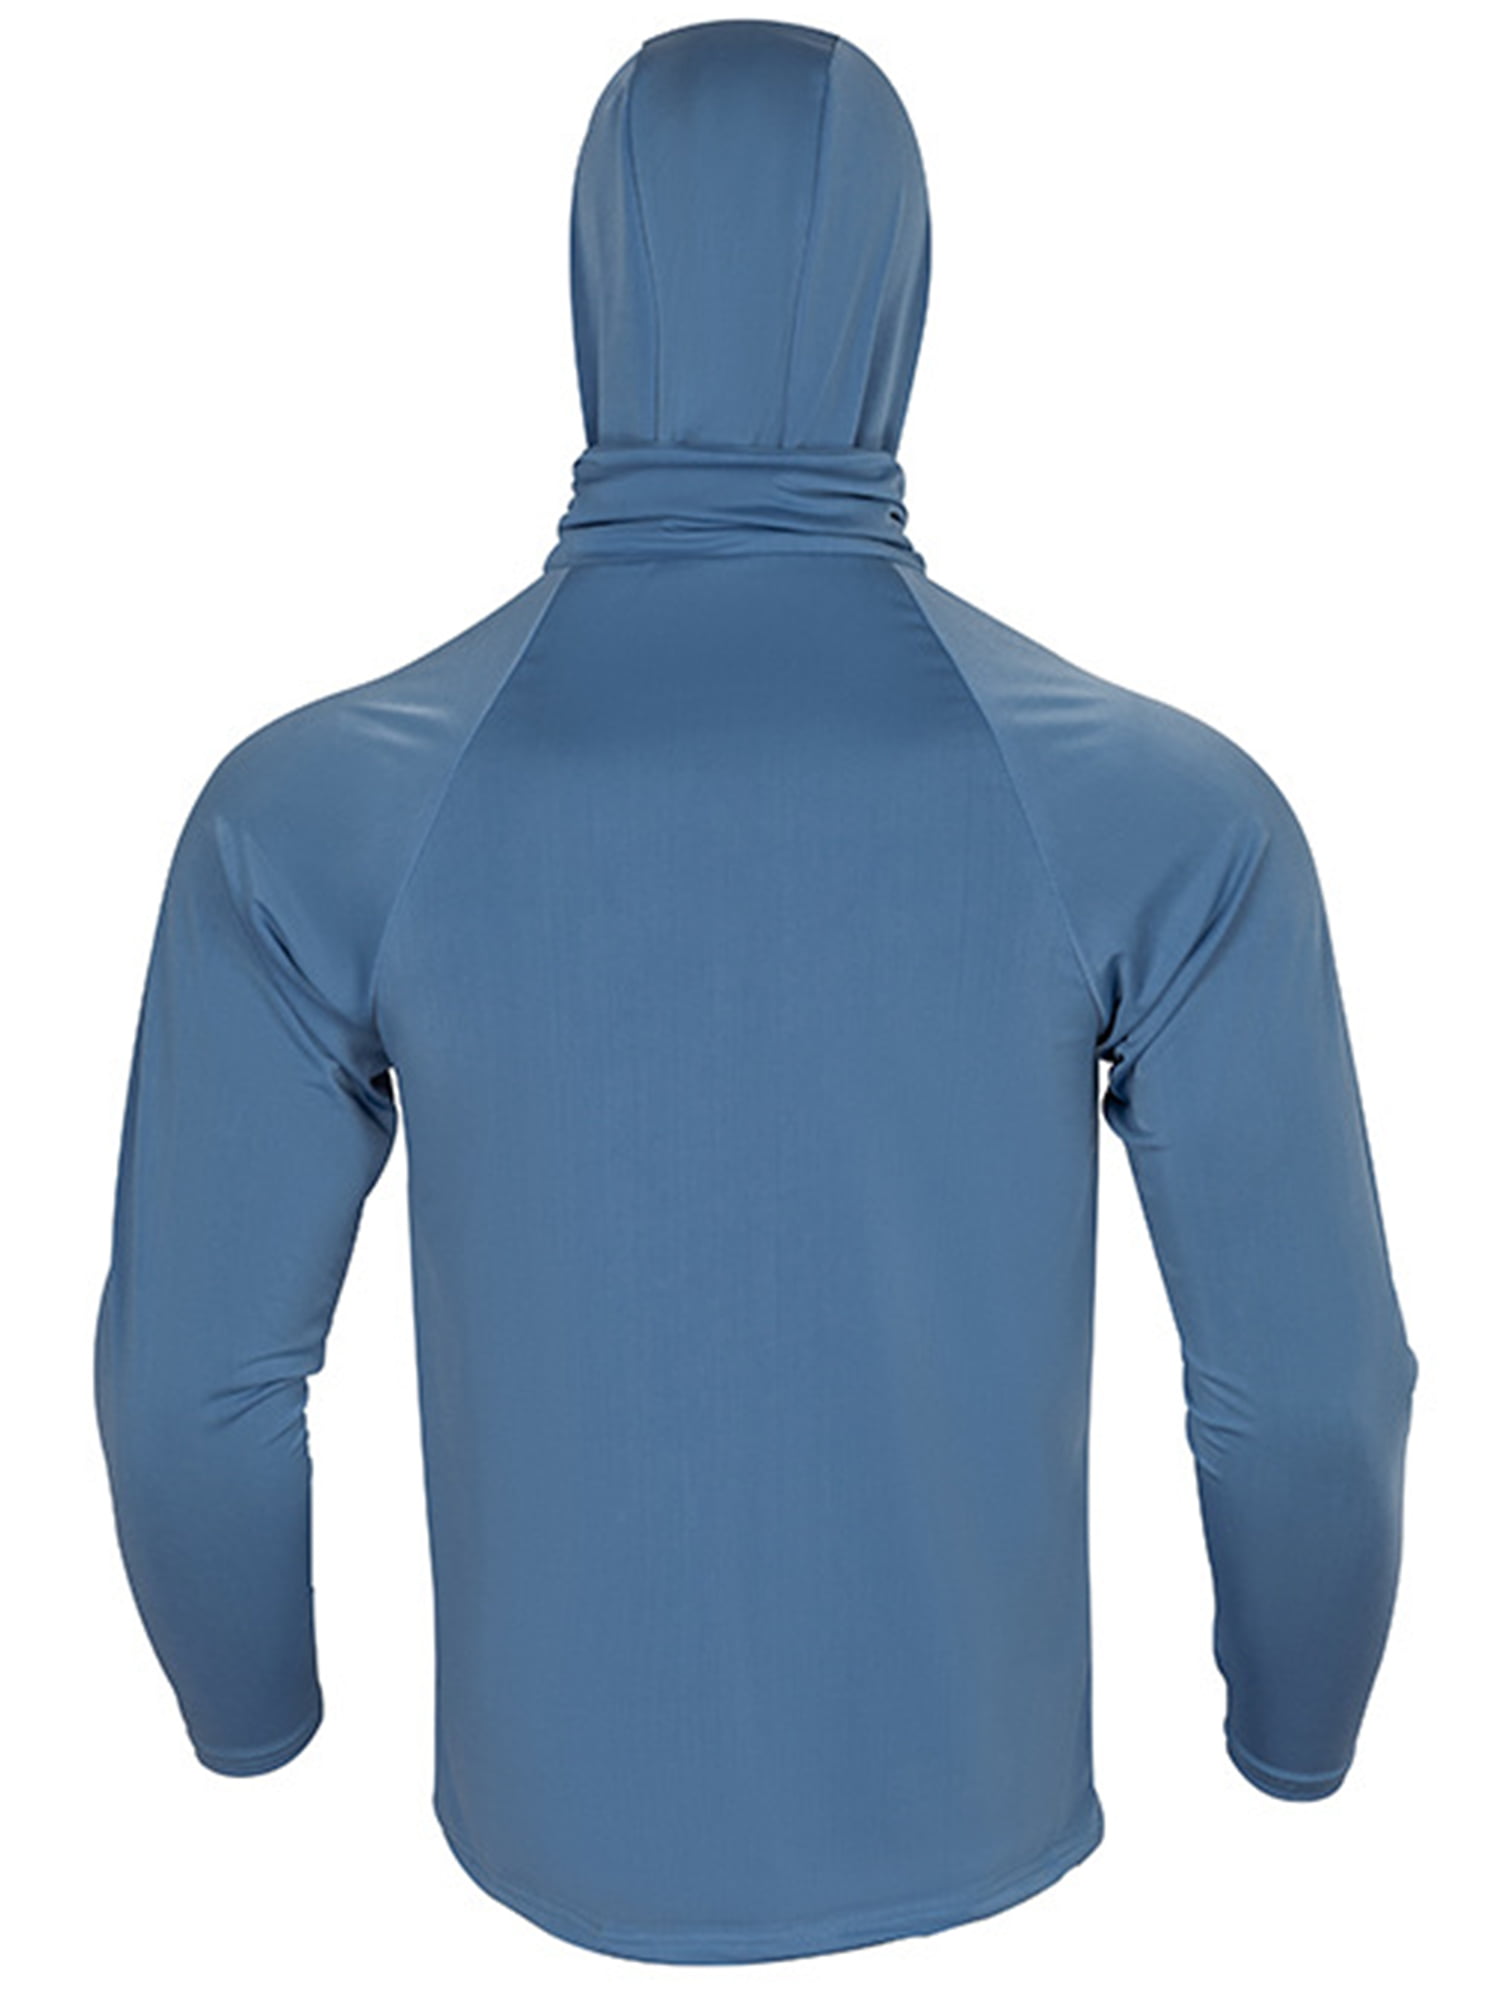 6-in-1 Professional UPF50+ Fishing Clothing for Men - Sun Protection Hoodie  Shirt with Breathable, Quick Dry, and Elastic Features, Ideal for Fishing